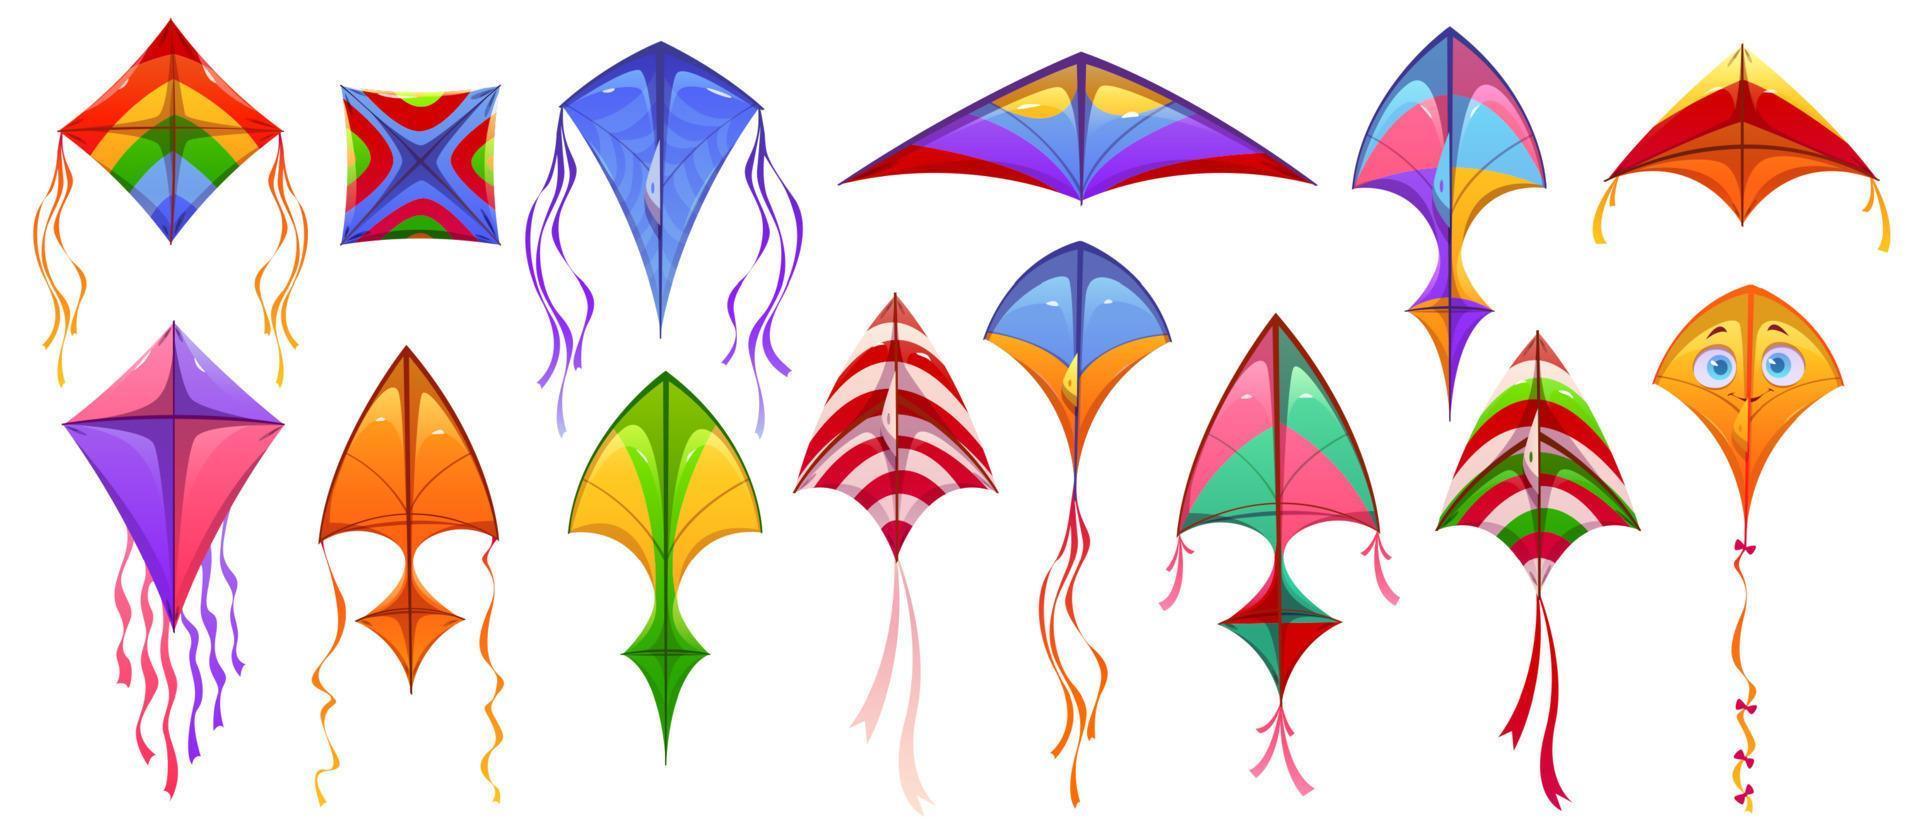 Kites icons, paper toys flying on wind in sky vector